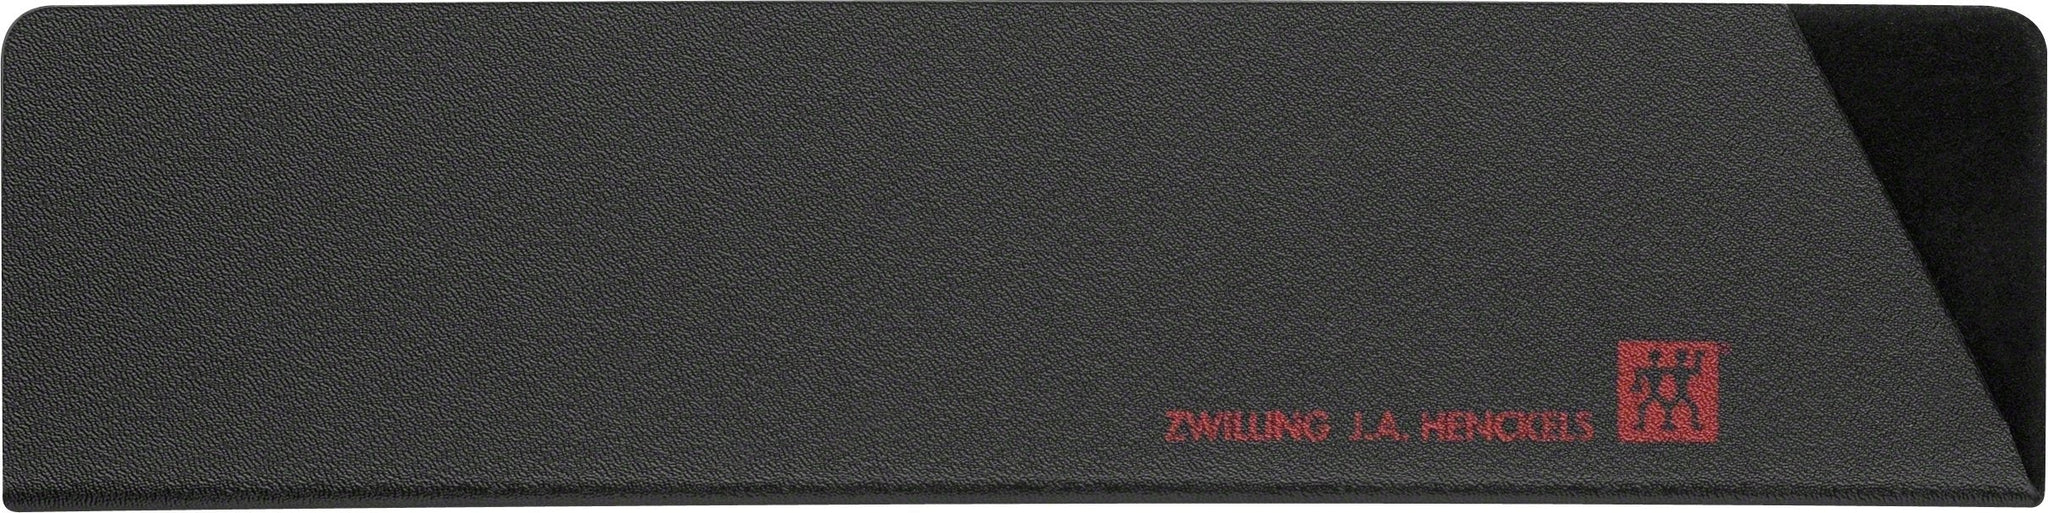 Zwilling - Sheath Knife Blade Cover - 30499-501